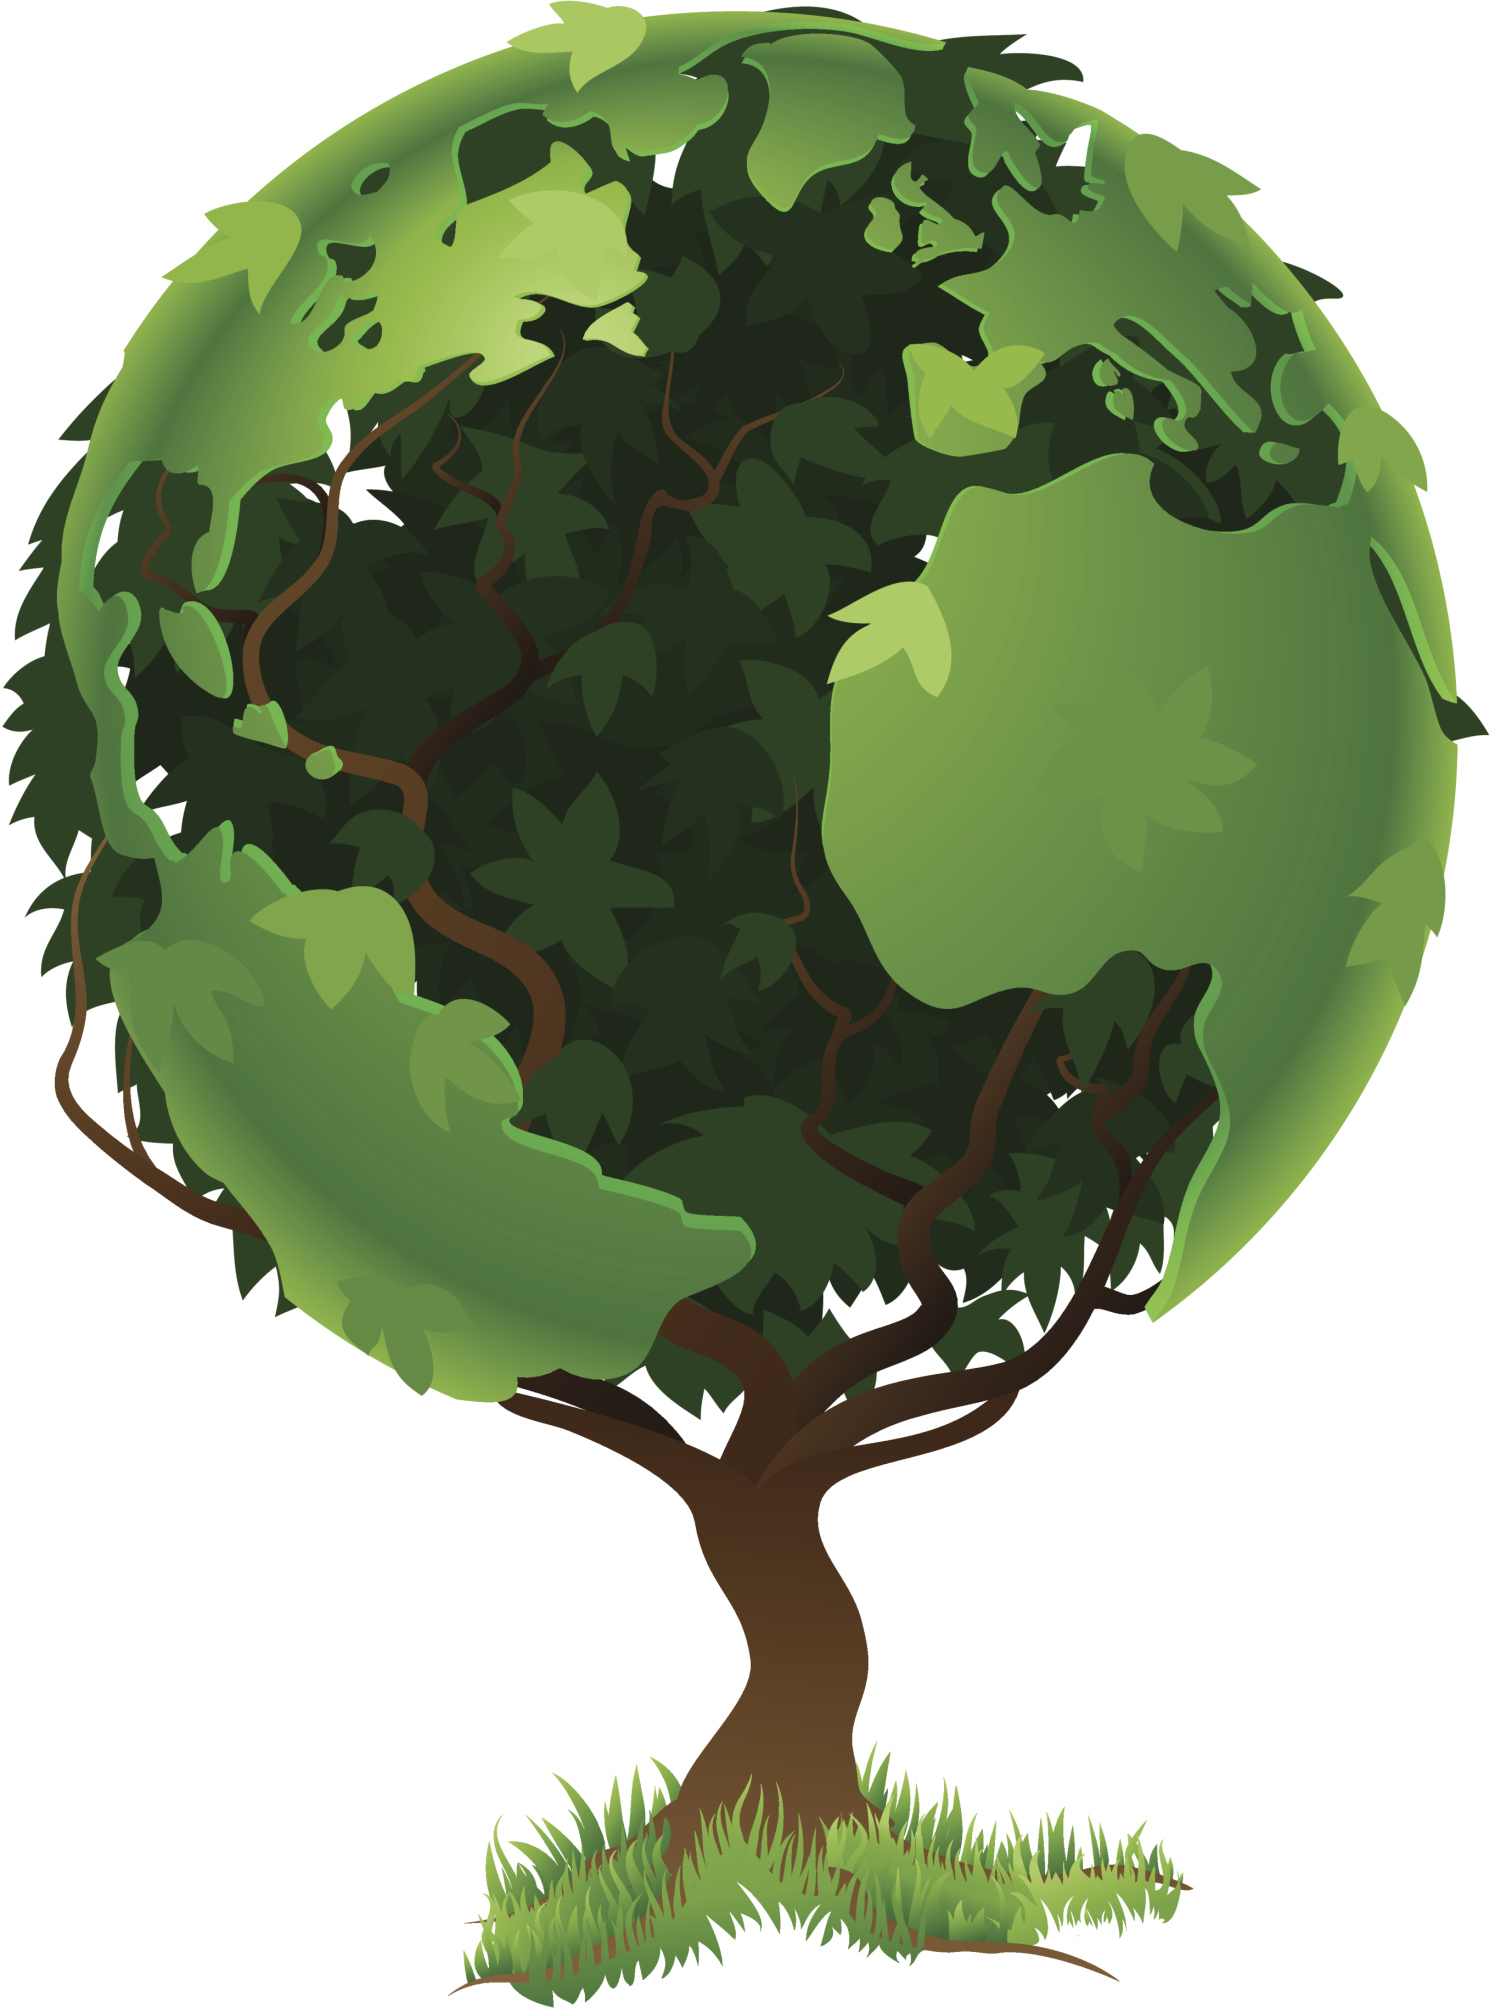 Free Healthy Planet Cliparts, Download Free Clip Art, Free